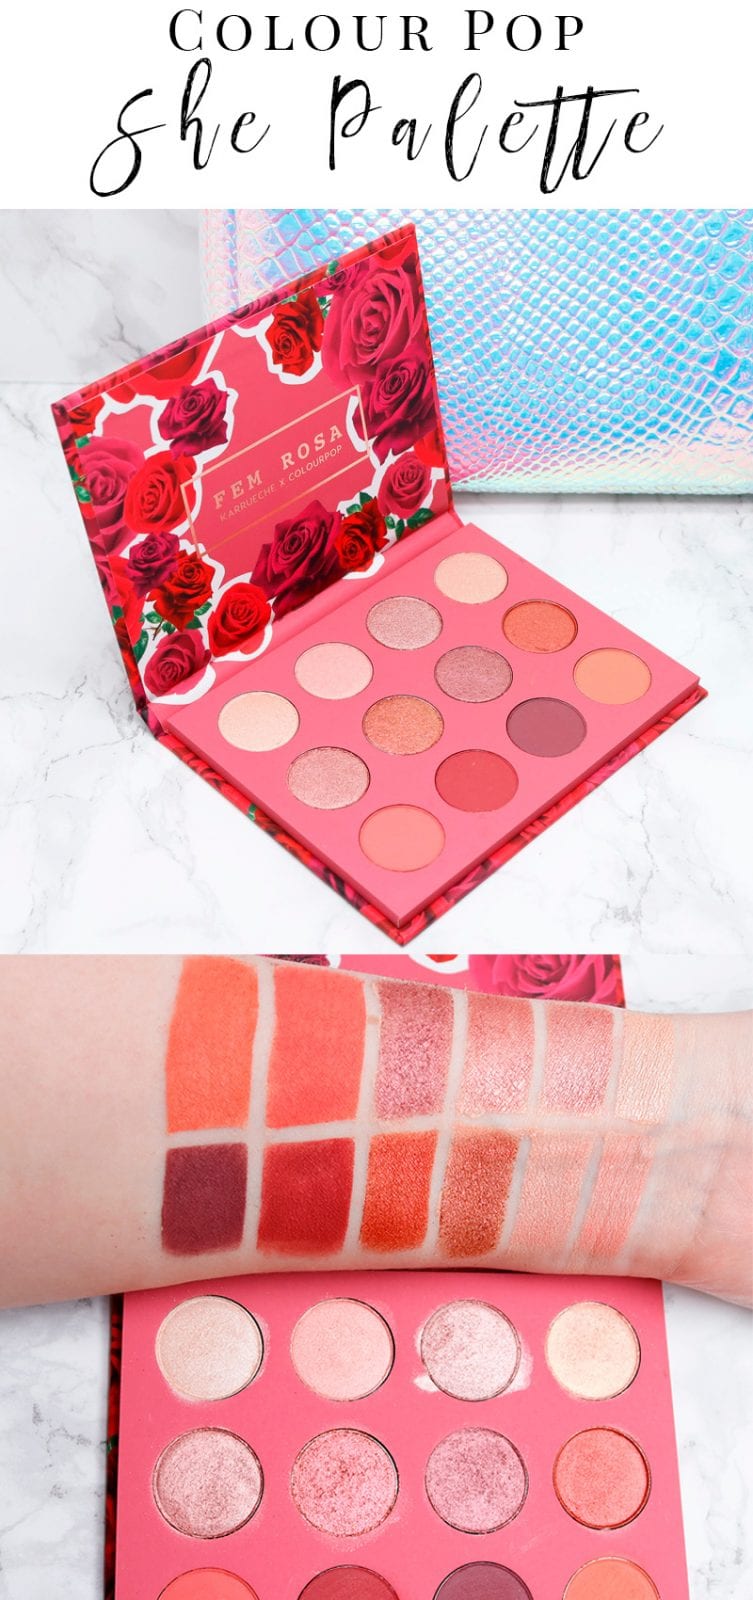 Colour Pop She Palette Review & Swatches. I love these mauves, pinks, peaches, plums, reds and gold. These colors look great on my pale skin. I also think they'll look fantastic on deeper skintones.